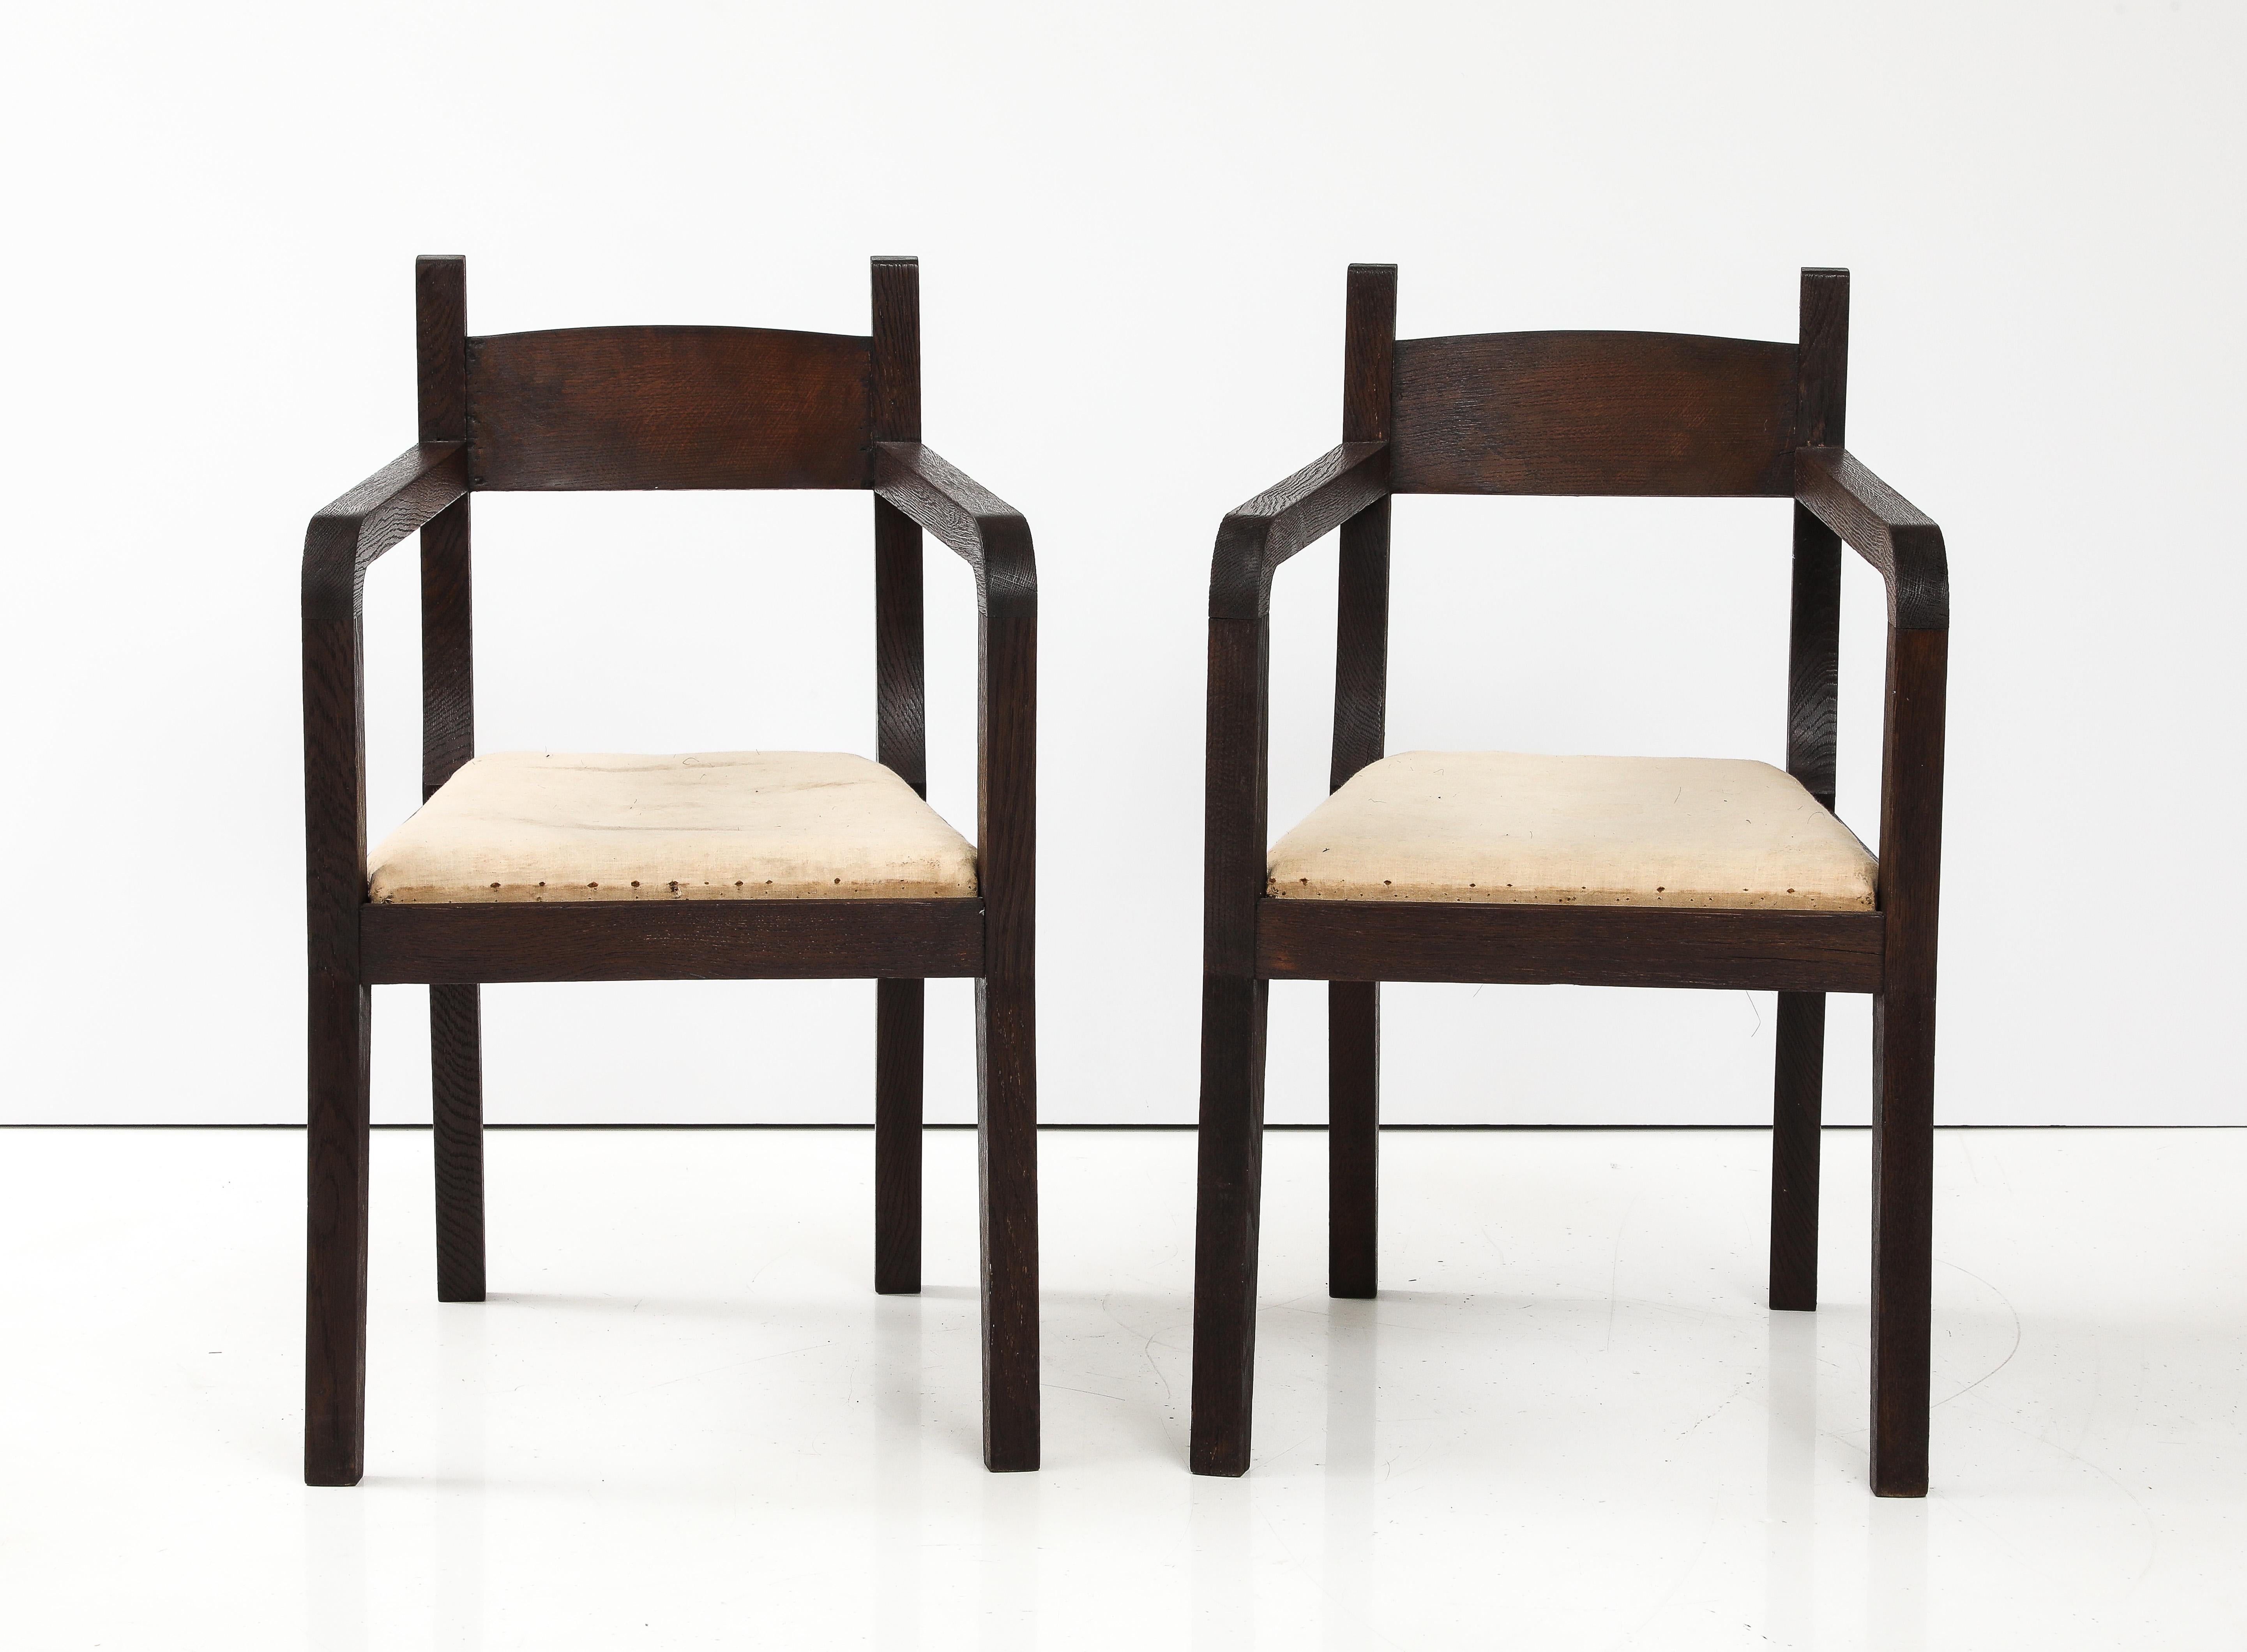 Pair of French Modernist Armchairs attributed to Eyre de Lanux, France, c. 1925
Brushed Oak, in muslin

H: 33.25 D: 20.75 W: 20 in.